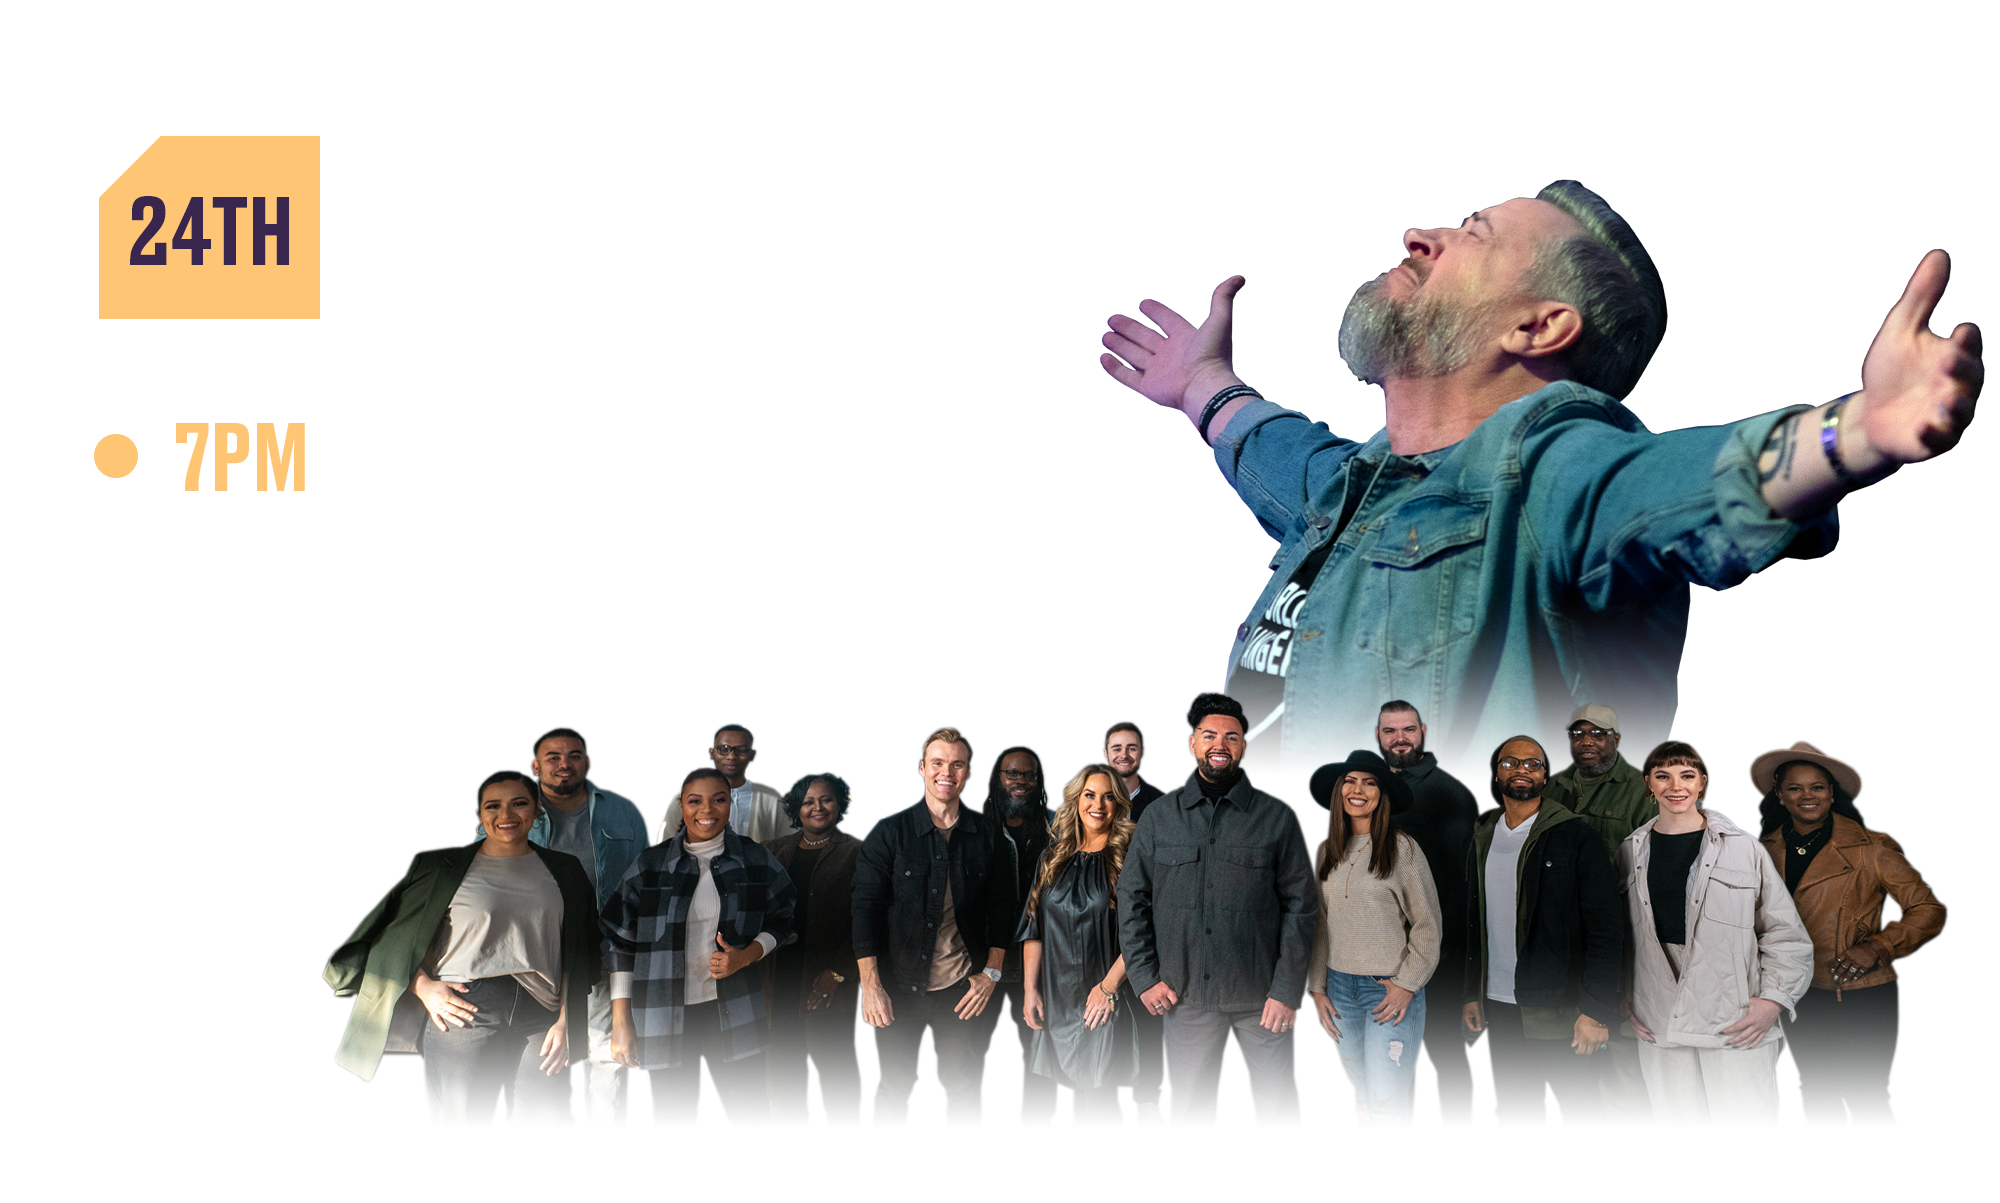 24th Thanksgiving Holy Communion Service 10AM With Dr. Rod Parsley and Harvest Music Live